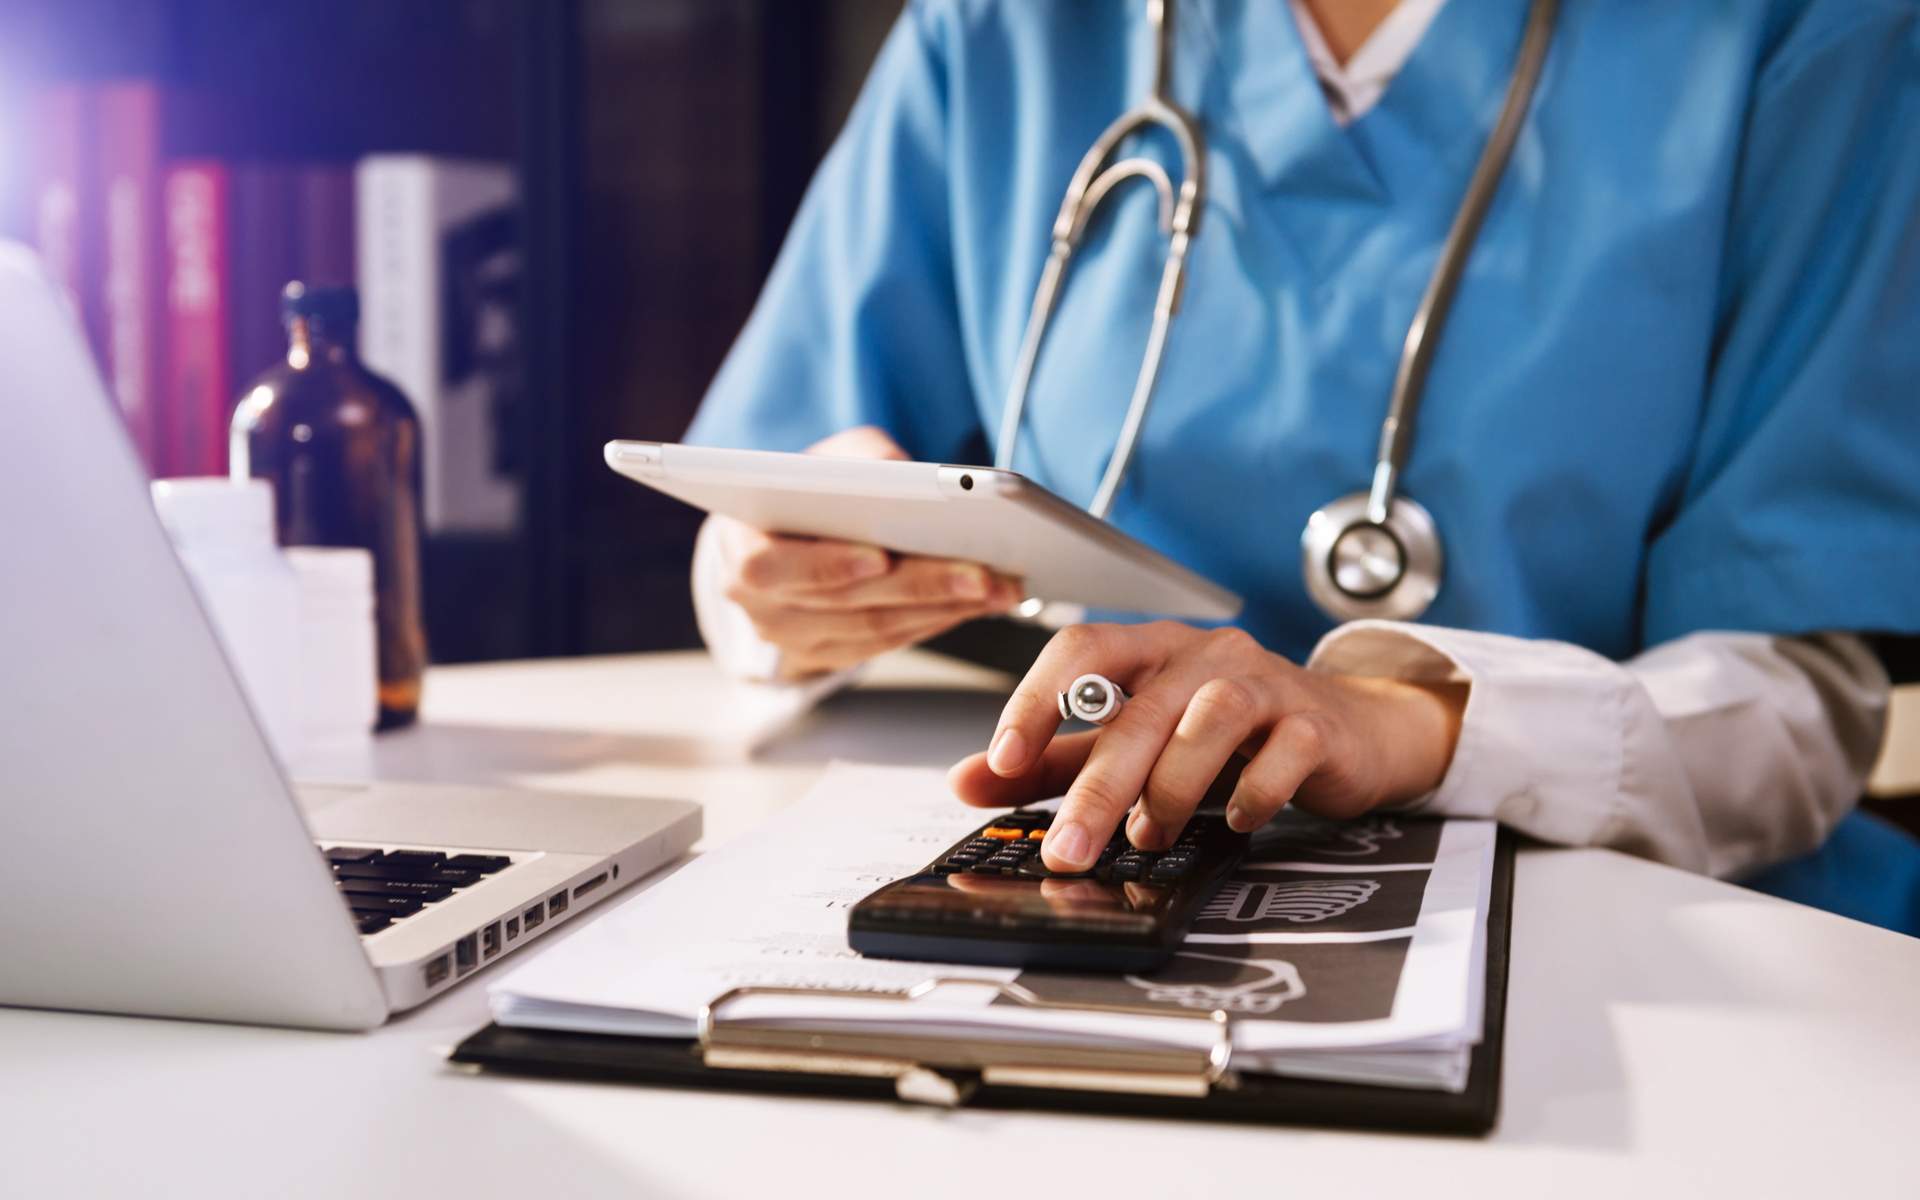 Image for Affordable Care Act Changes for 2023 and What to Expect in the 2023 Open Enrollment Period. An image of a doctor sitting at a desk with a laptop, tablet, and a calculator.